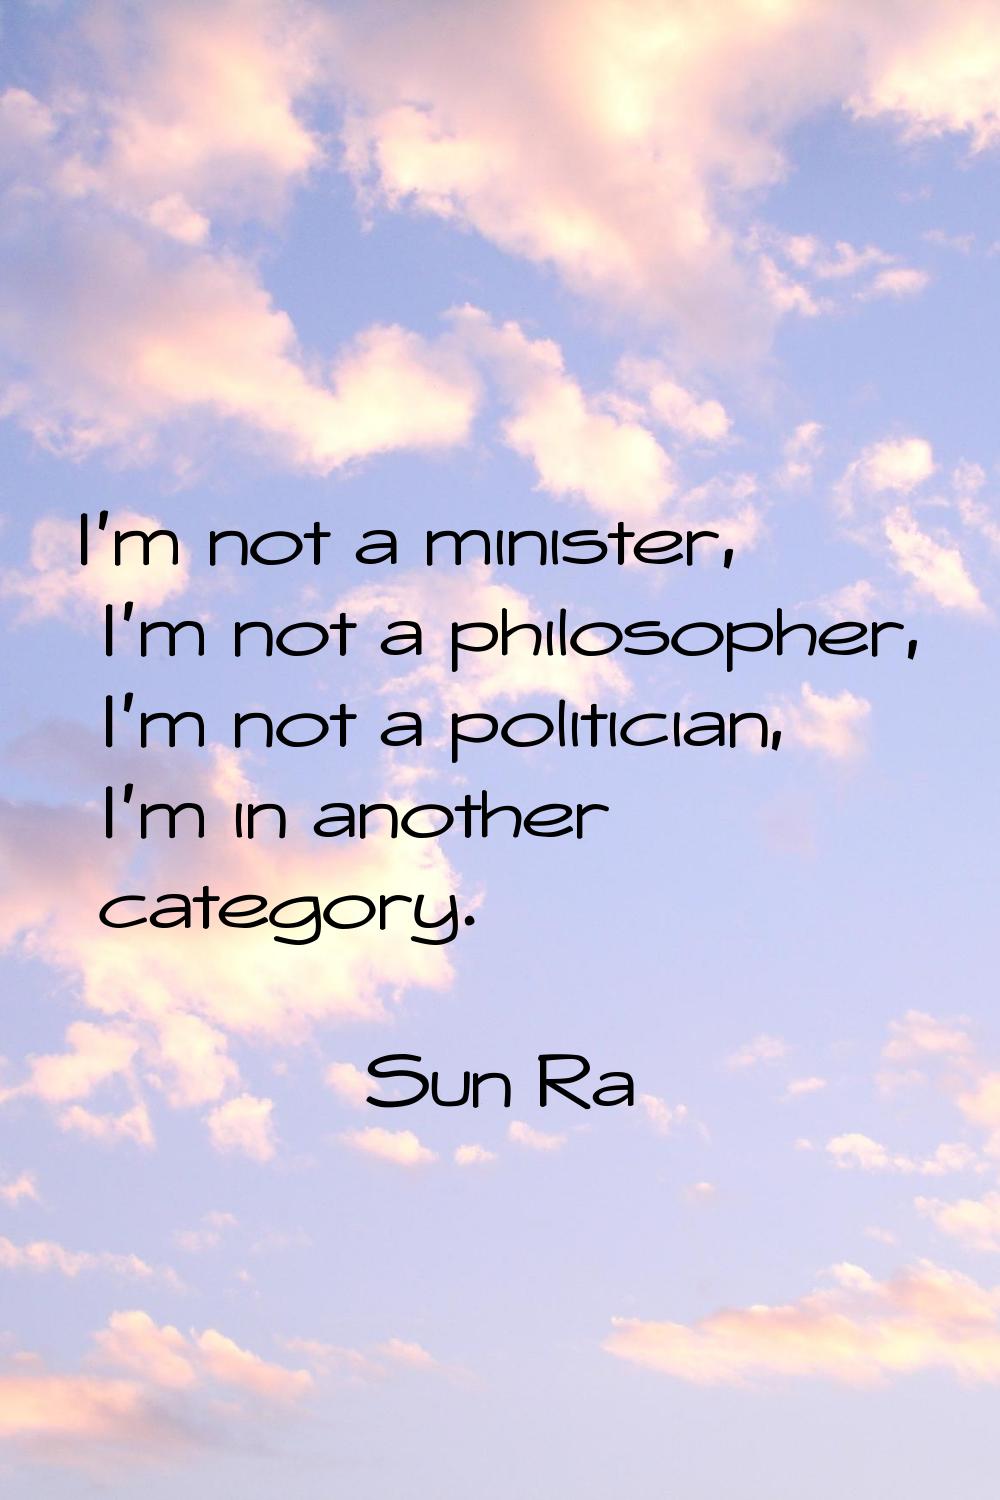 I'm not a minister, I'm not a philosopher, I'm not a politician, I'm in another category.